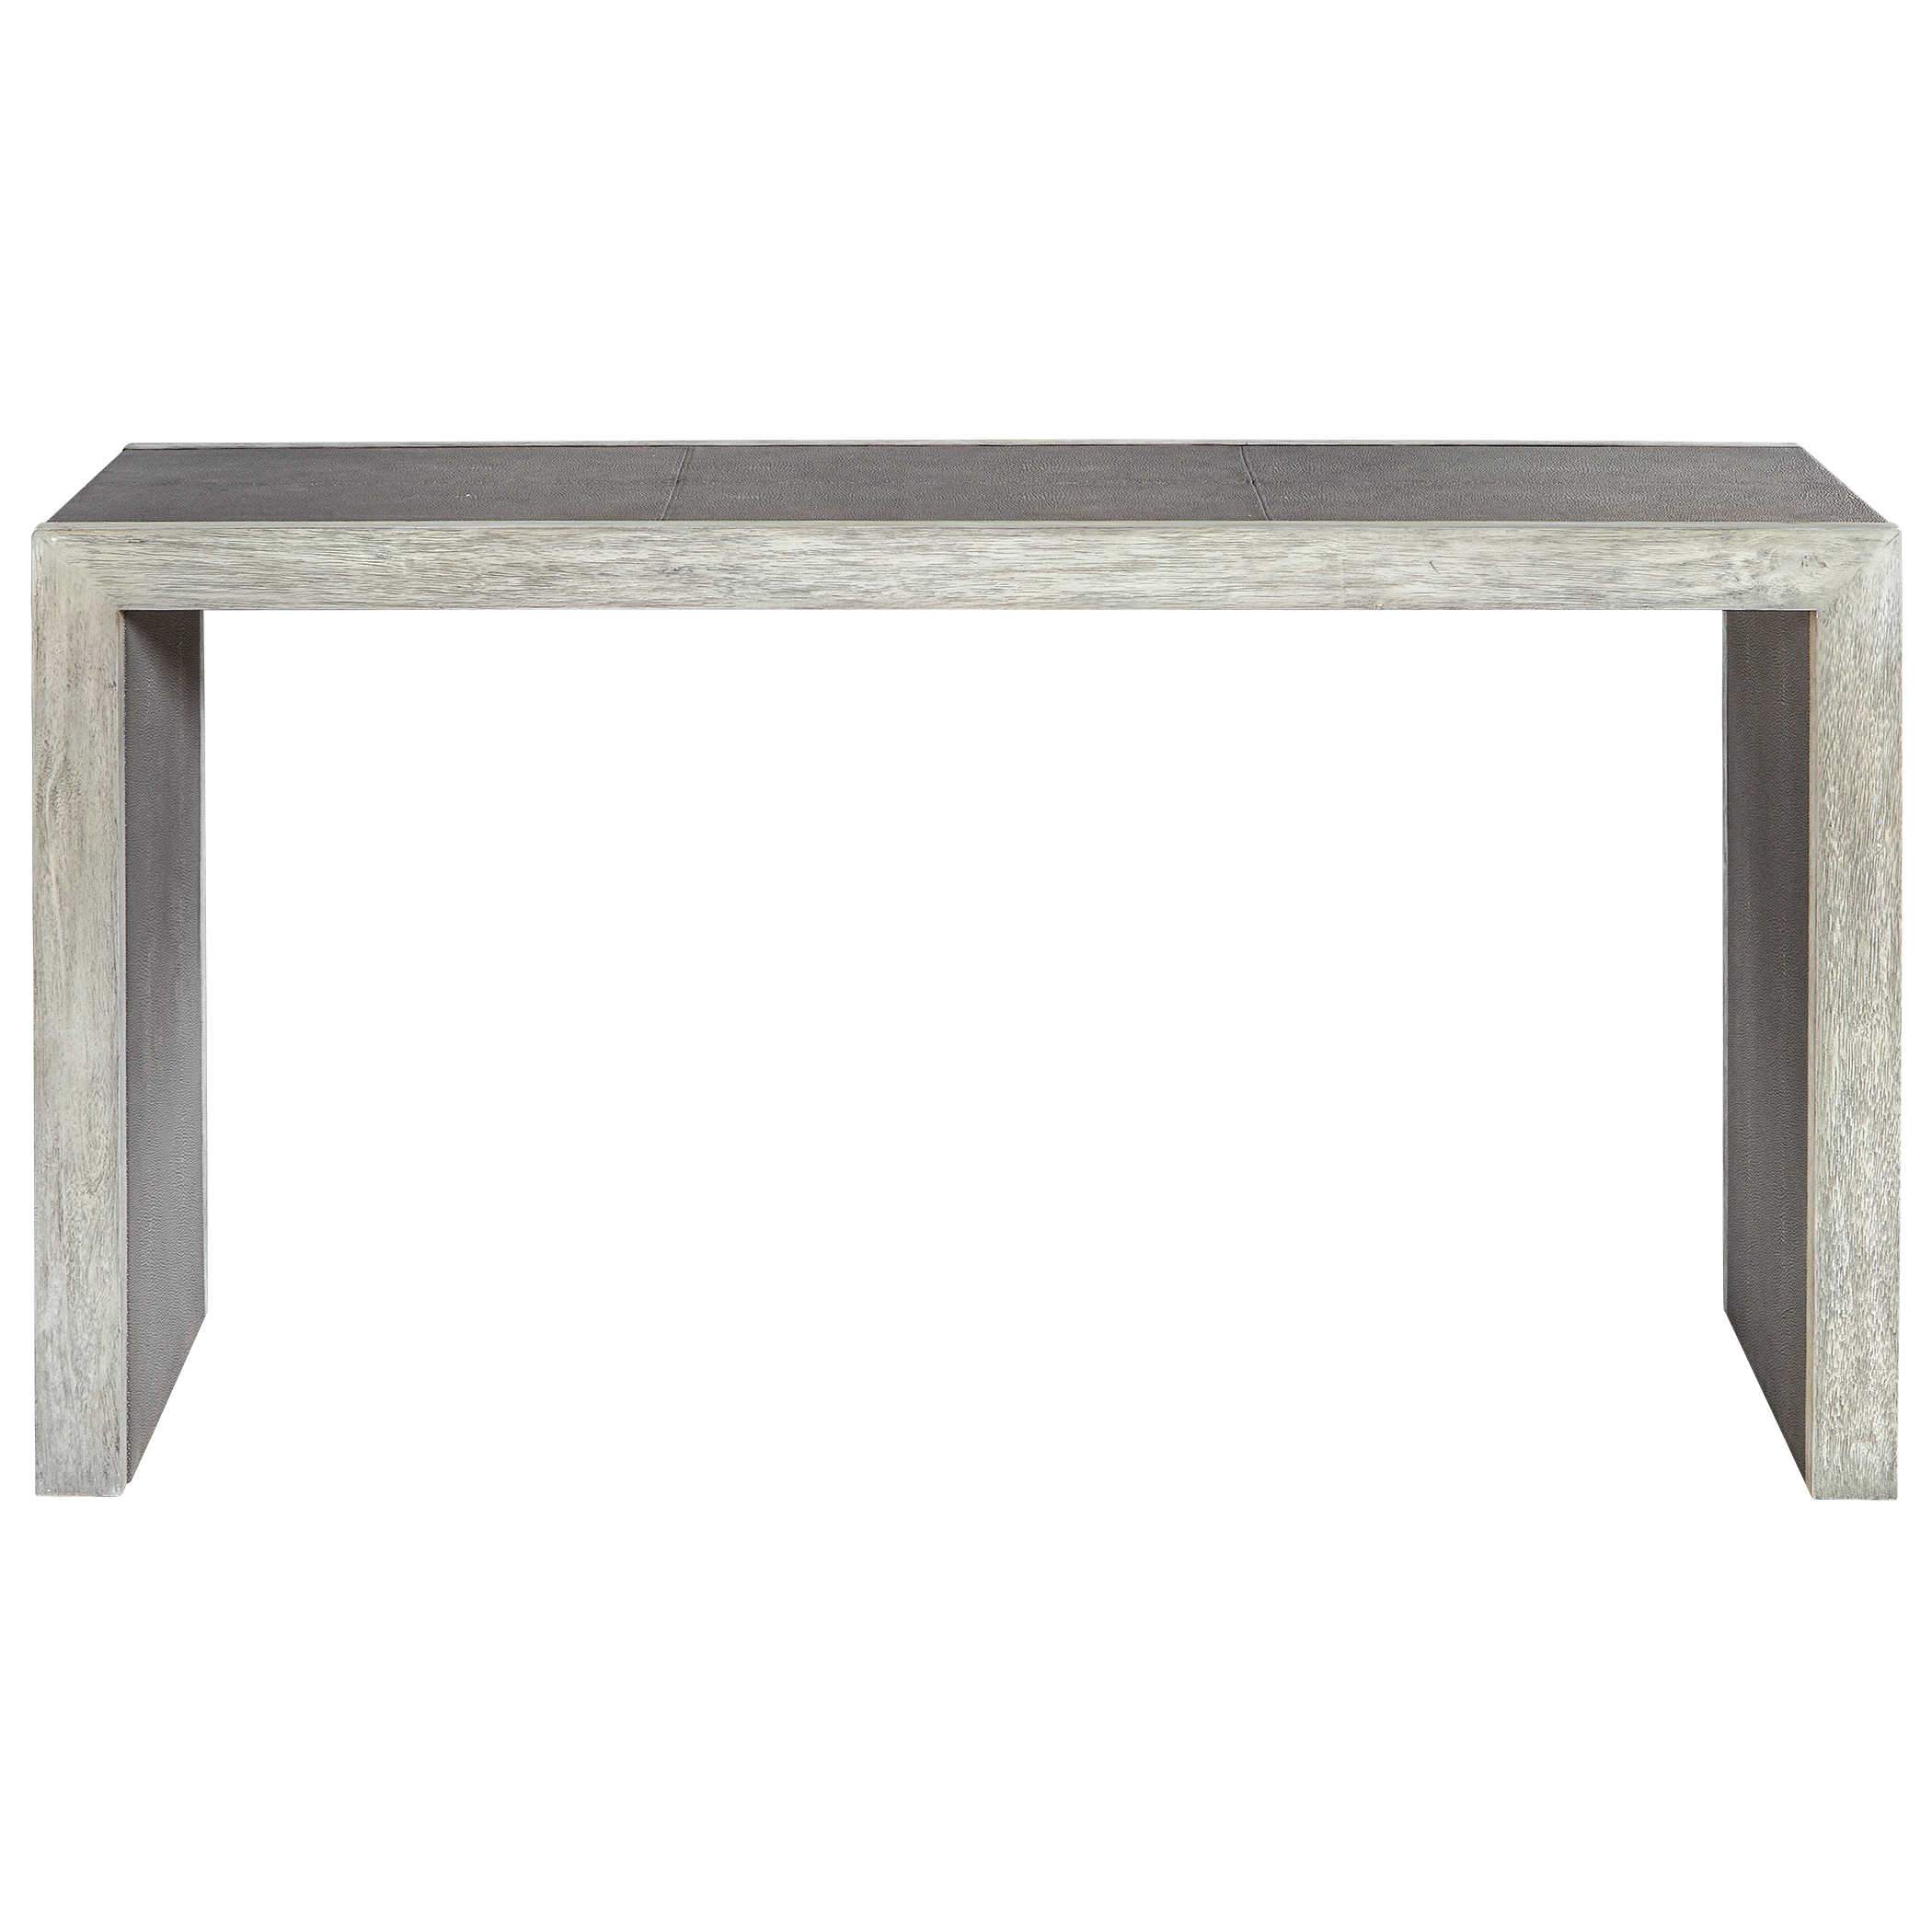 Uttermost Home Motor Freight - Rate to be Quoted Uttermost Aerina Console Table - Shipping January